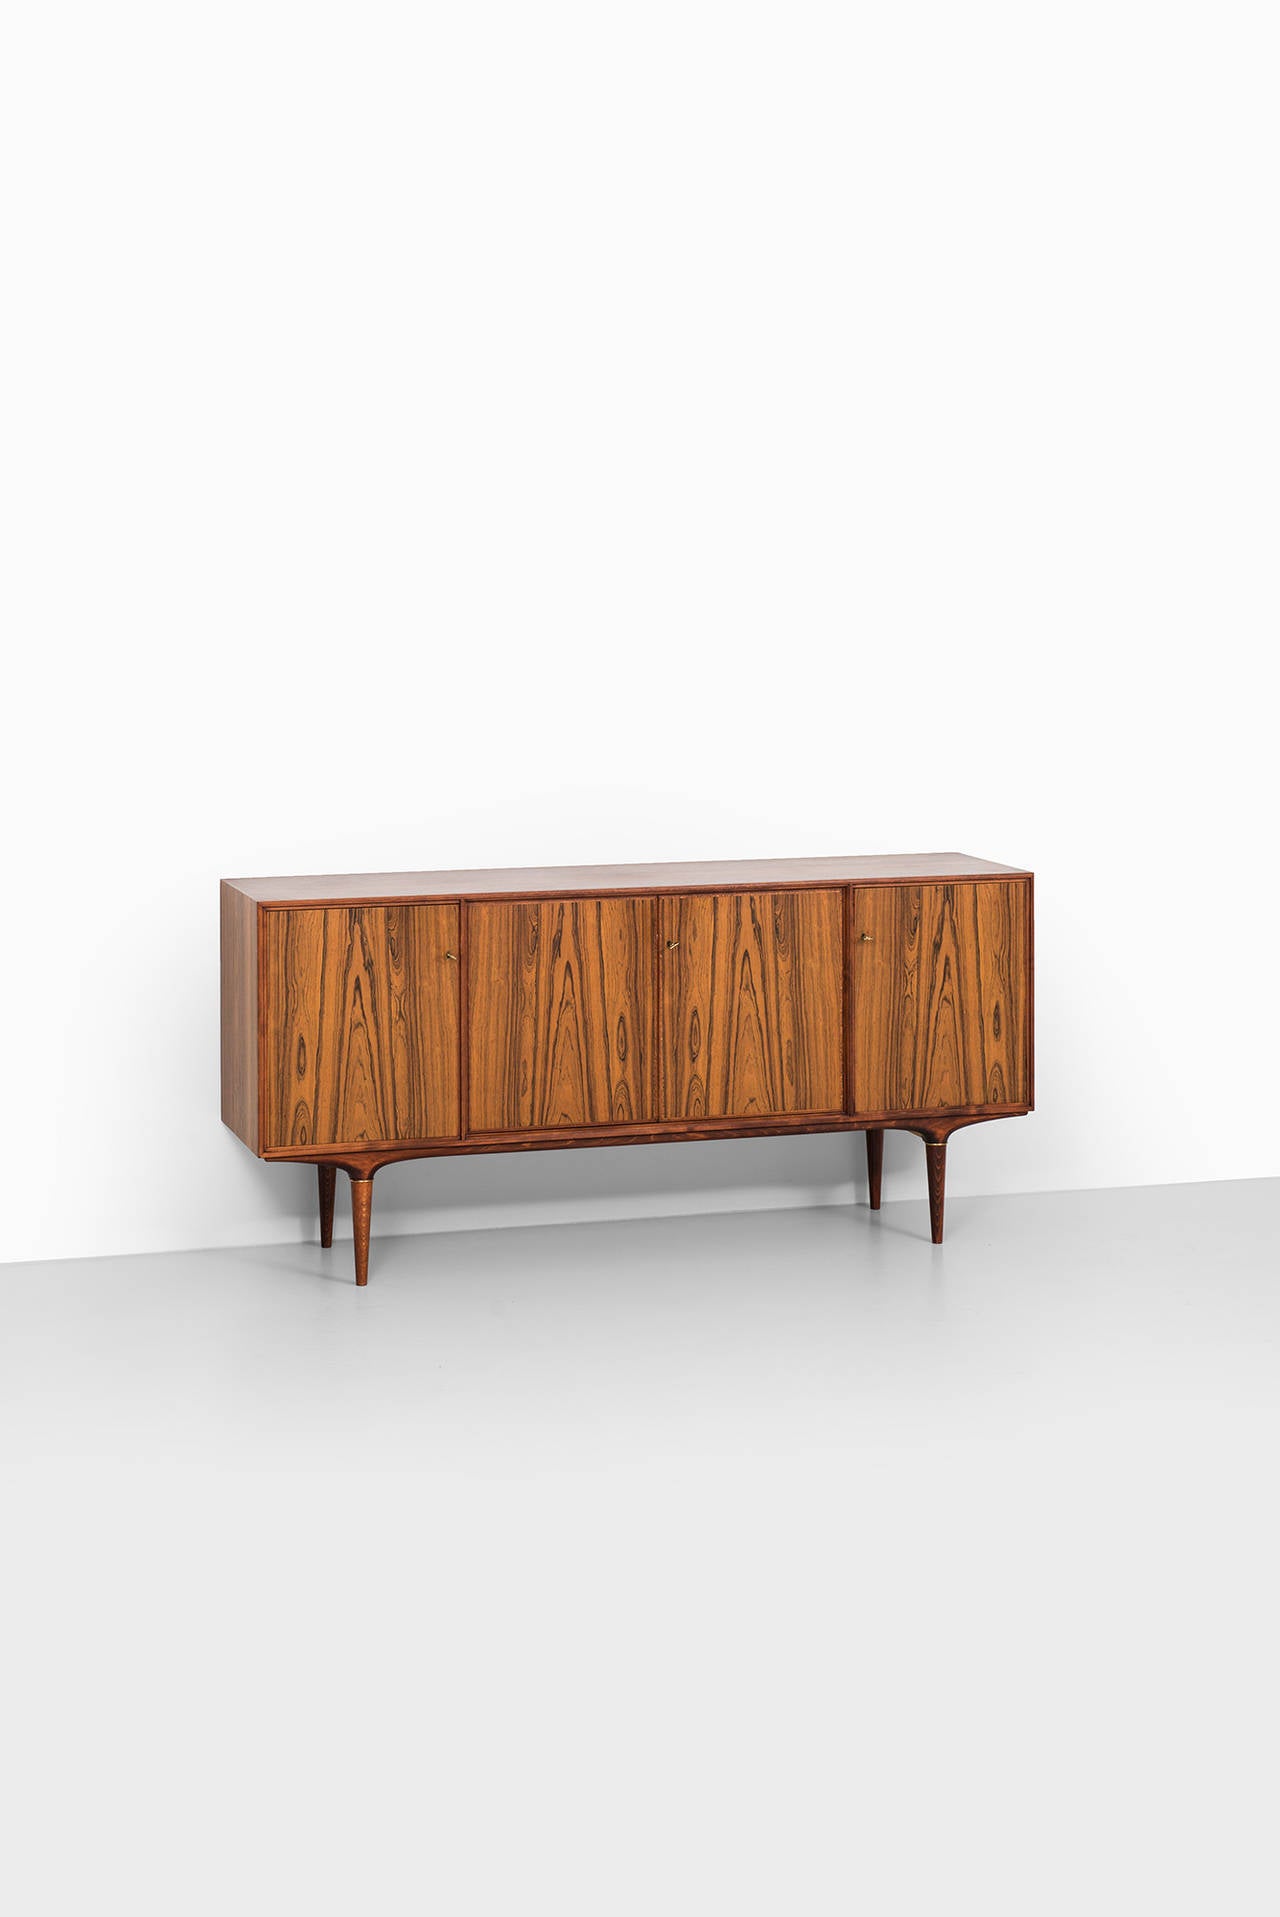 Mid-20th Century Svante Skogh Sideboard Model Cortina in Rosewood and Brass